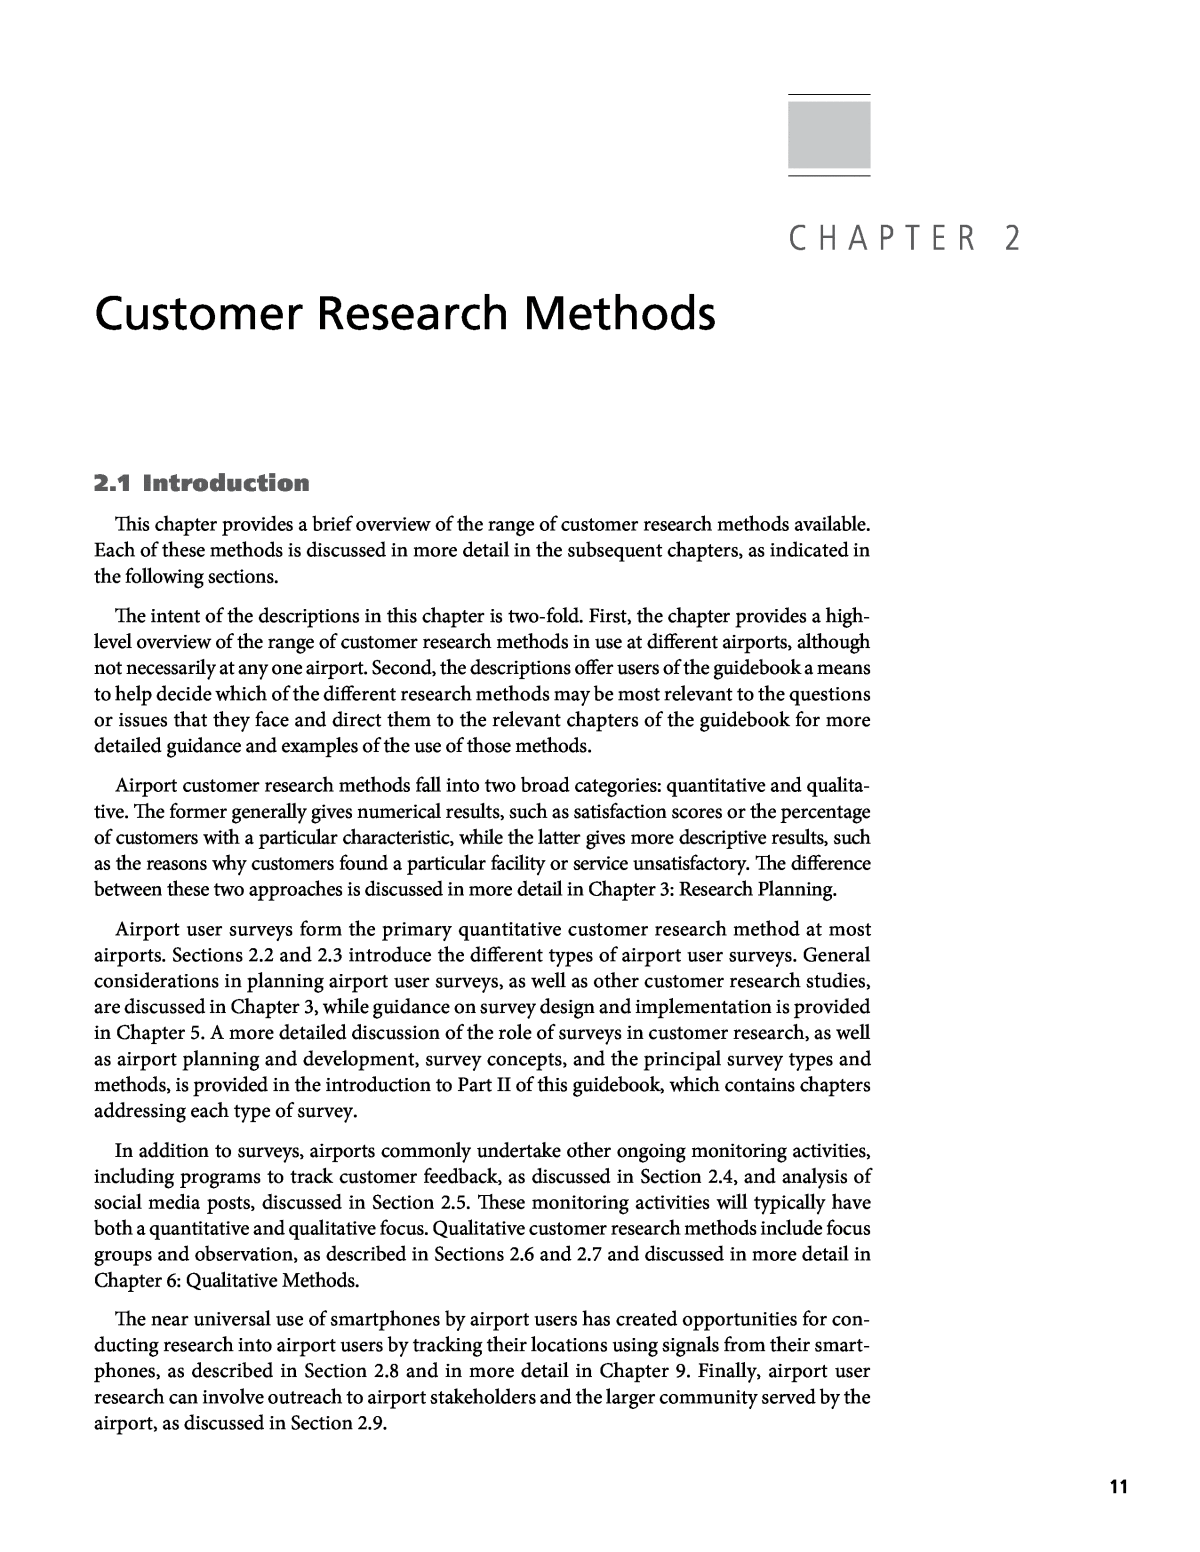 Part I - Conducting Customer Research, Guidebook on Conducting Airport  User Surveys and Other Customer Research